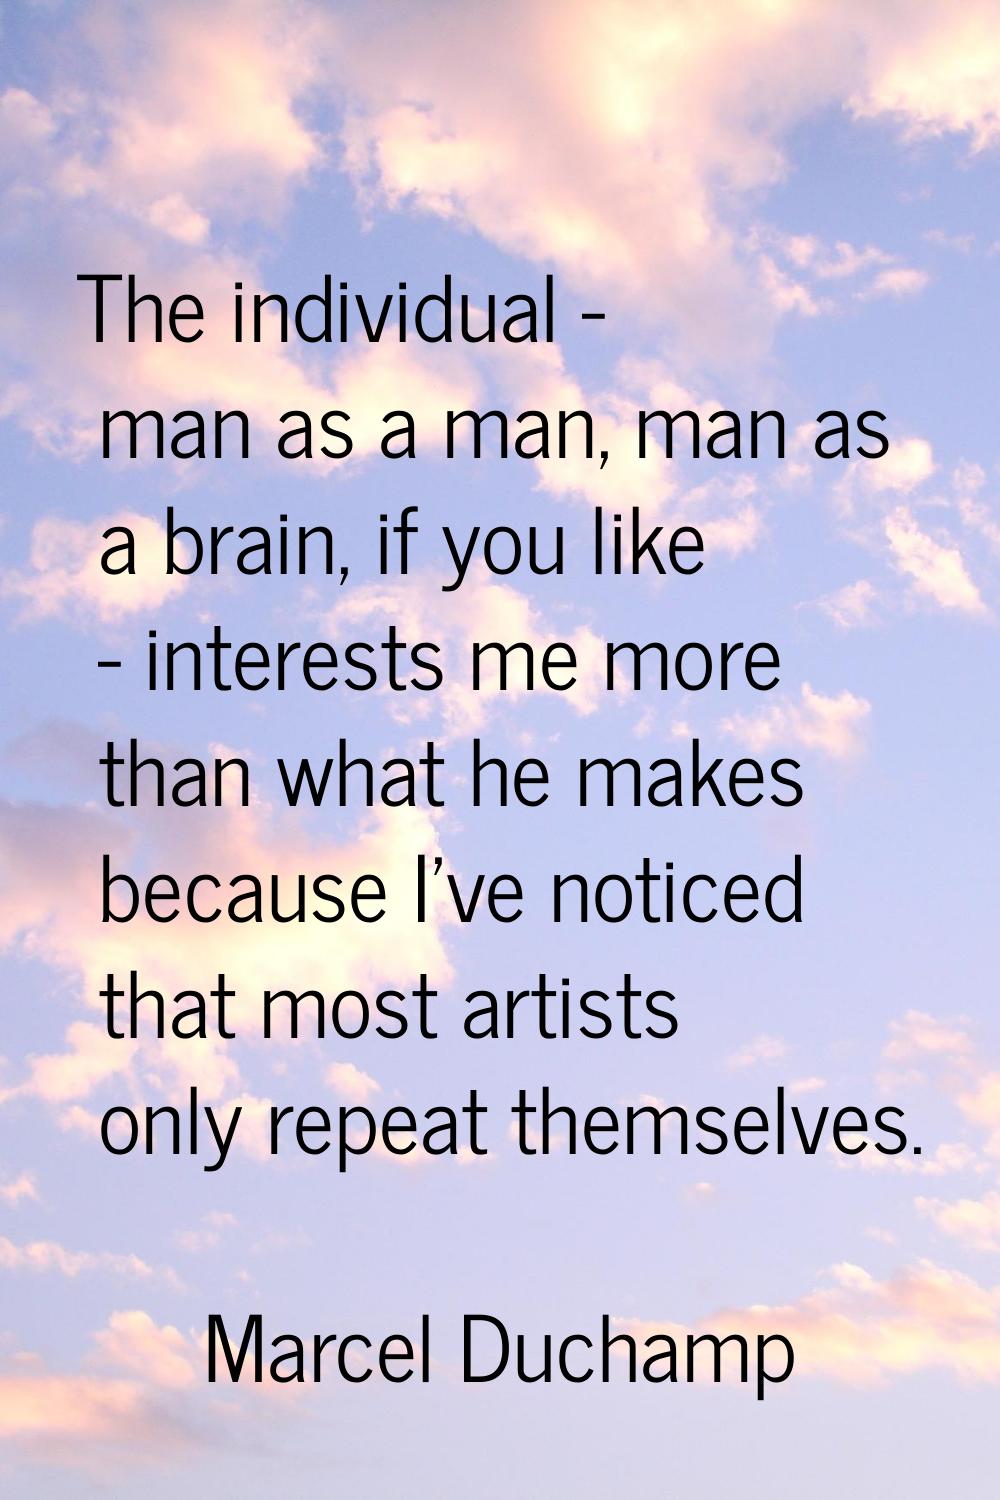 The individual - man as a man, man as a brain, if you like - interests me more than what he makes b